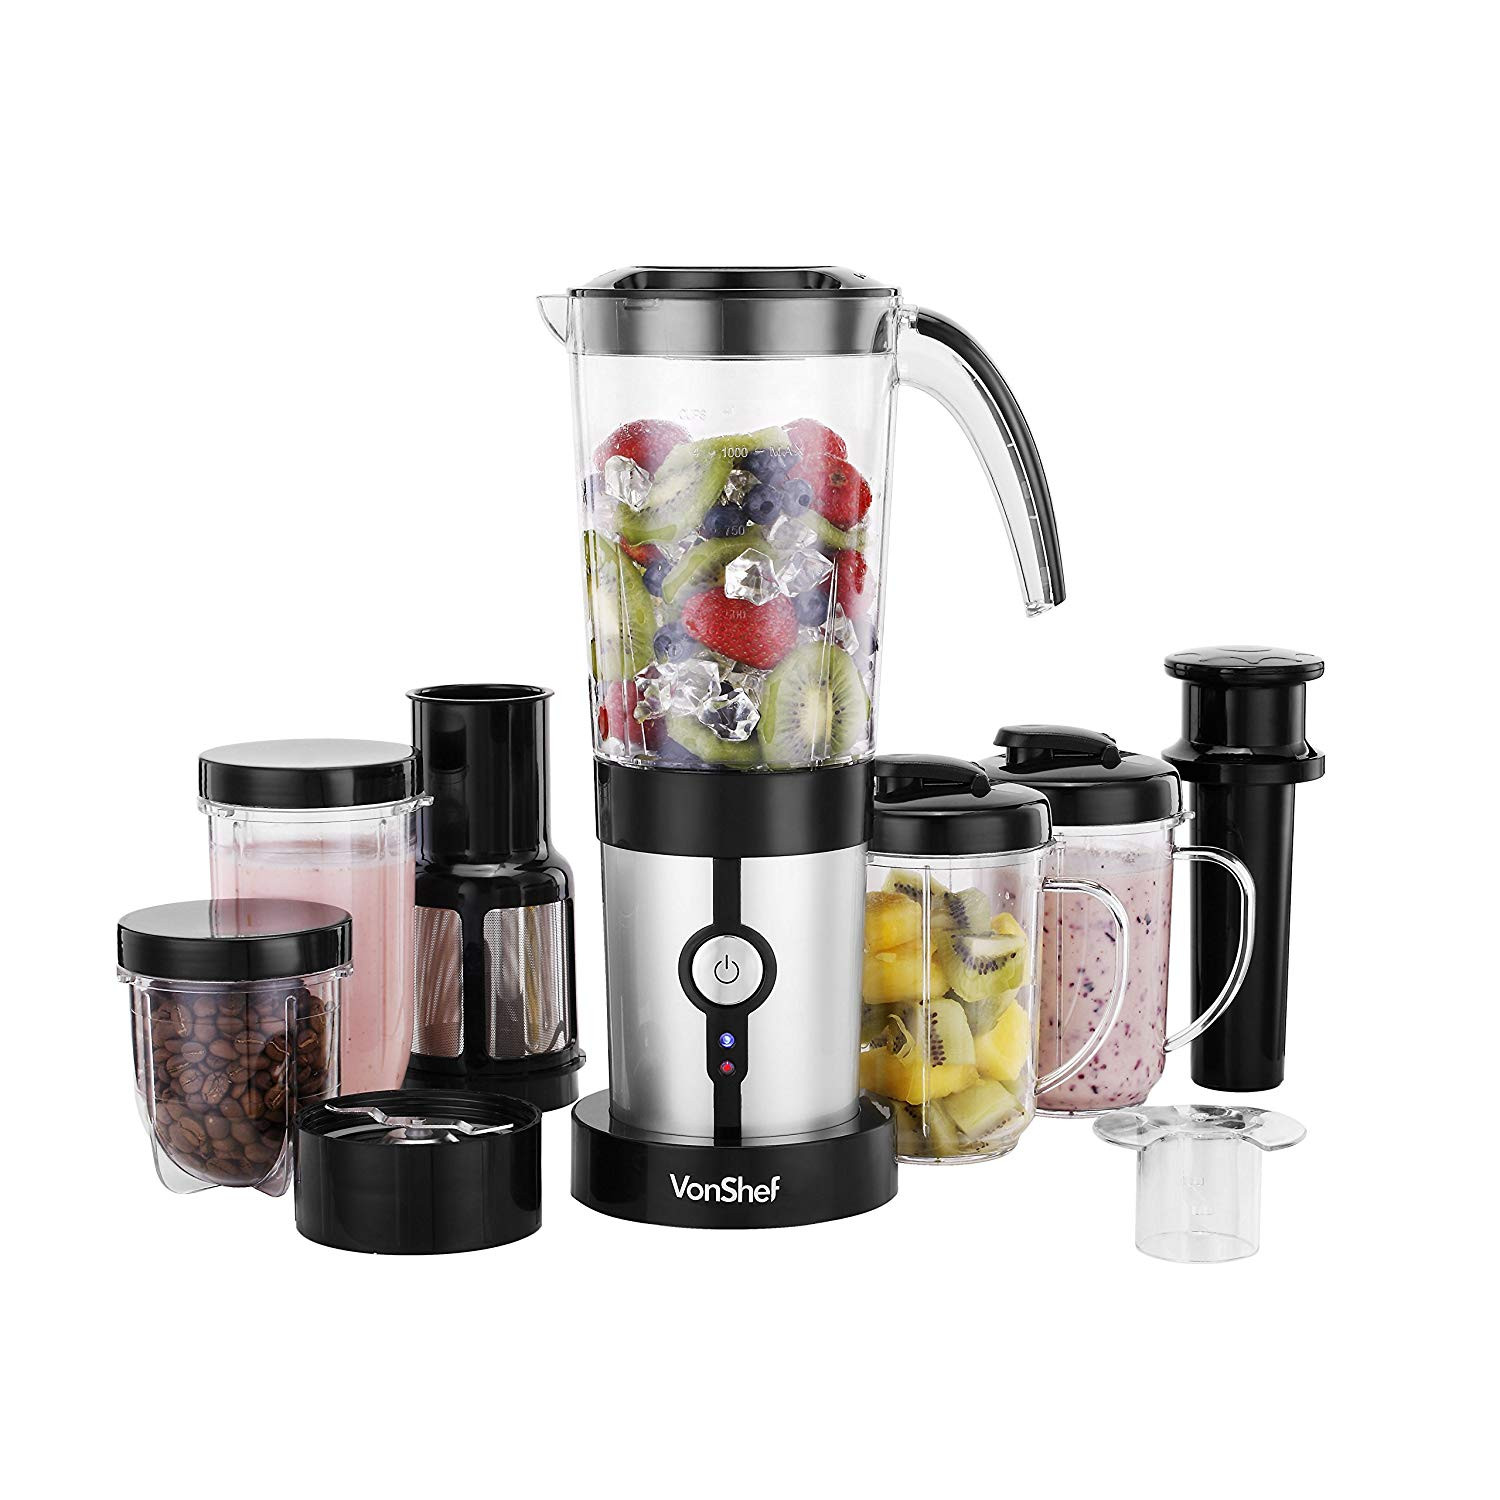 Blender For Smoothies
 The 5 Best Personal Blenders For Smoothies to Buy in July 2018